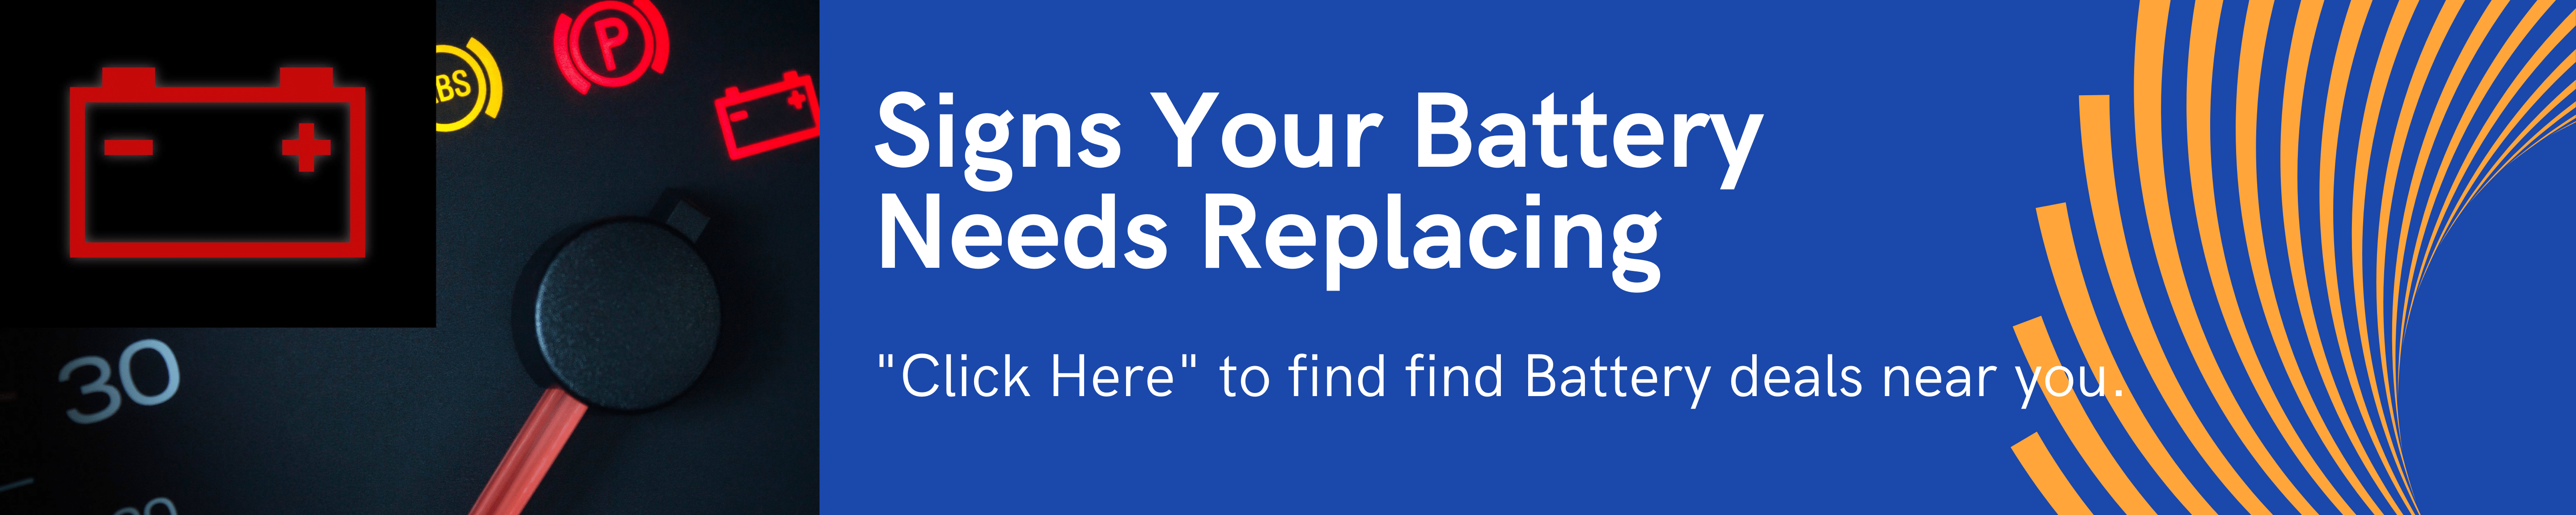 Signs Your Battery Needs Replacing